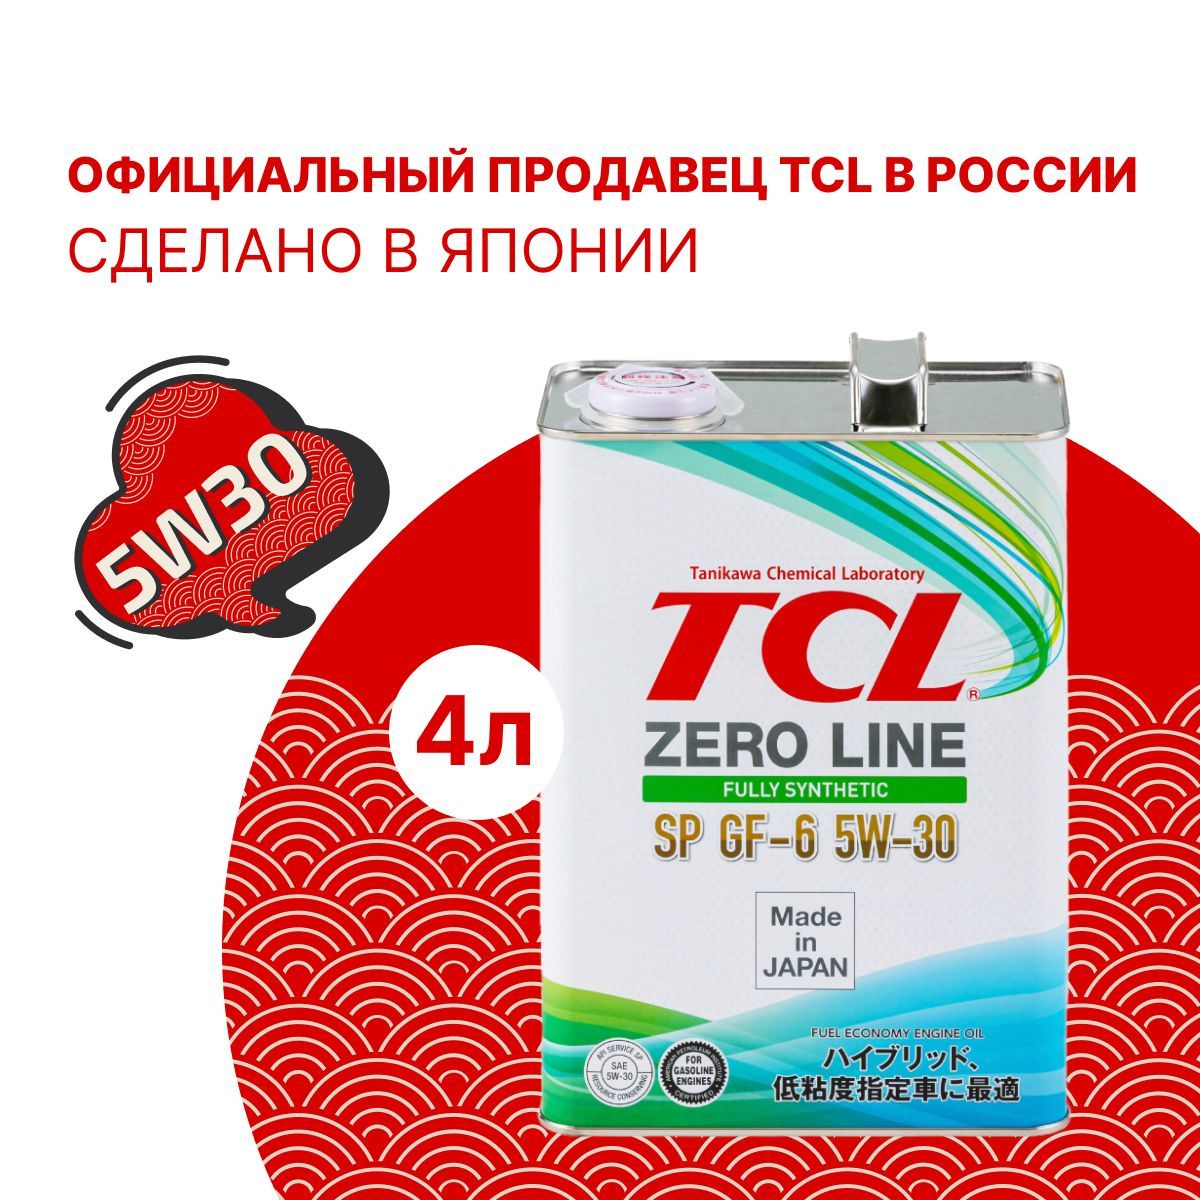 TCL 5 30. TCL 5w30. TCL масло моторное 5w-30. TCL 5w30 gf-6. Моторное масло tcl 5w30